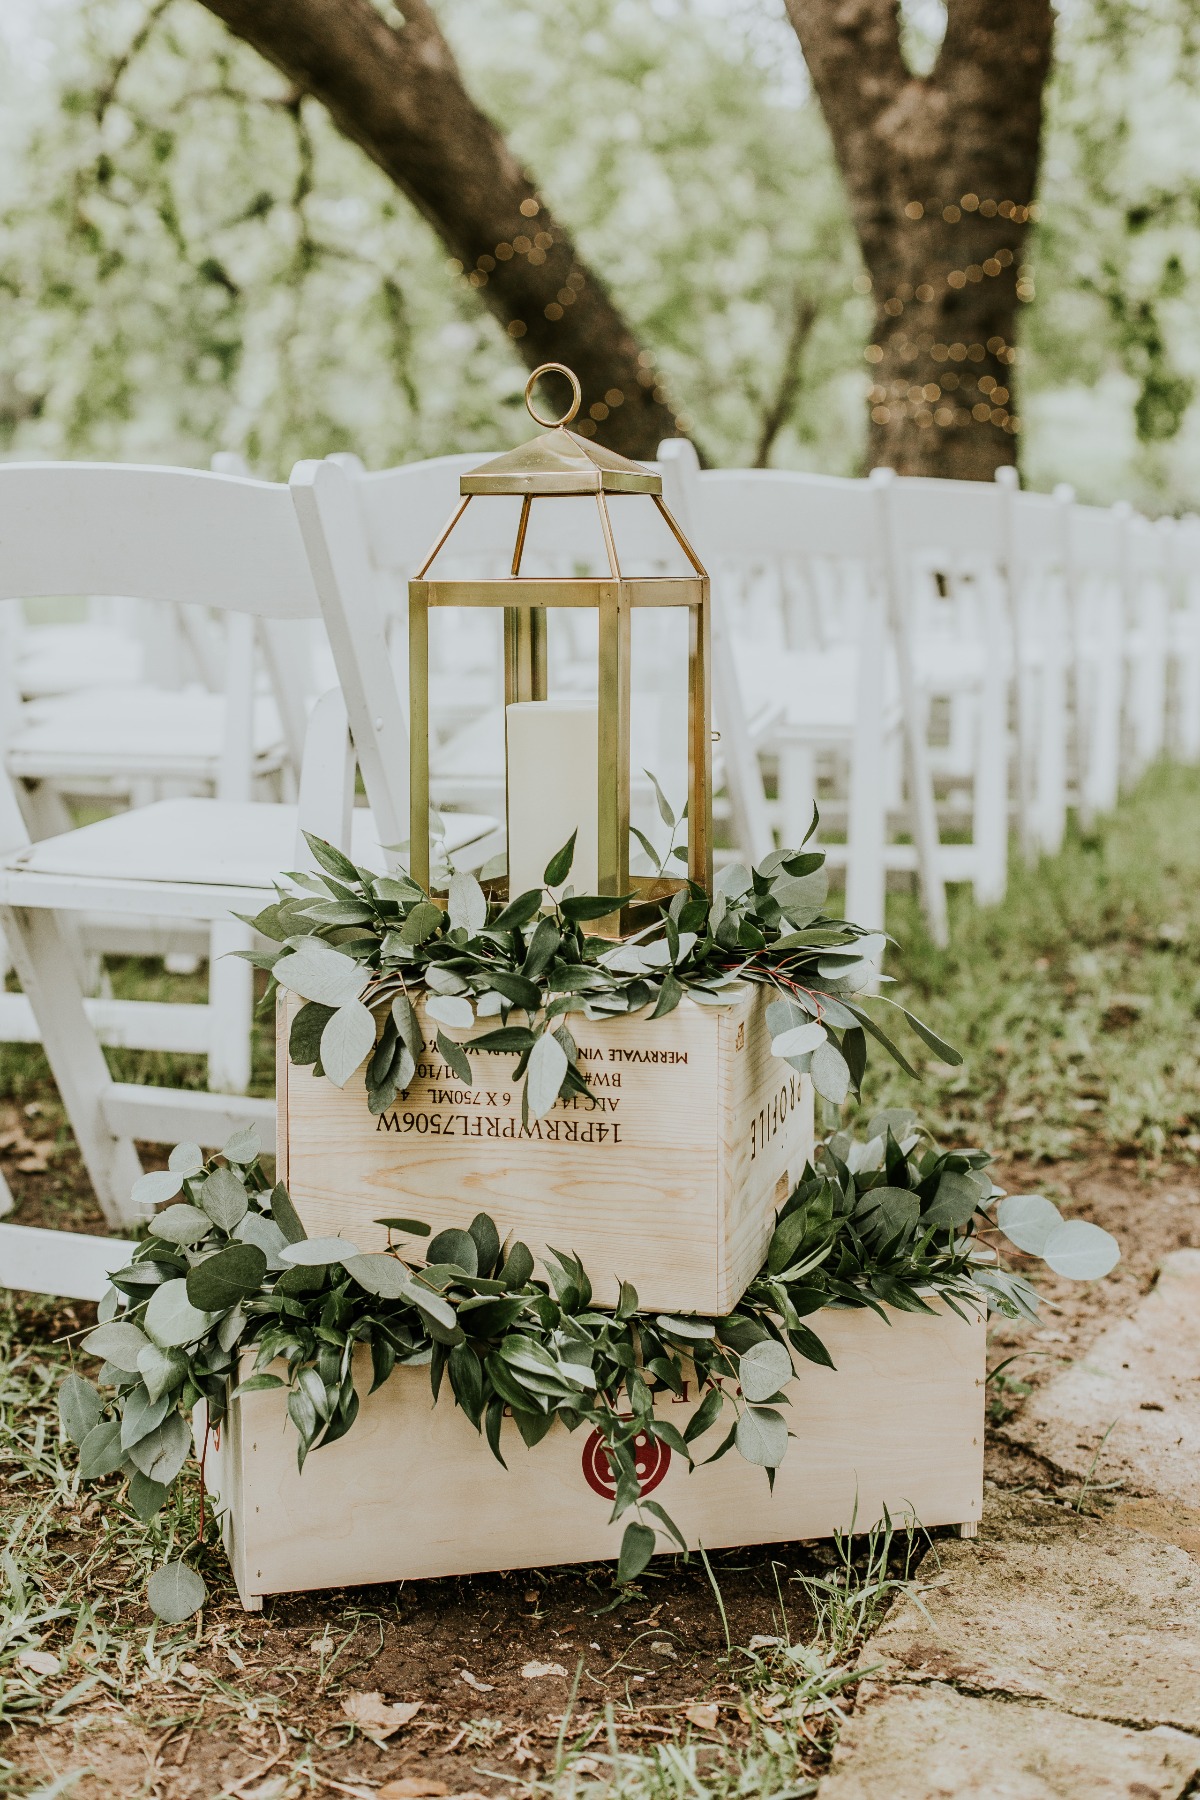 brass lanterns on boxes with greenery used for aisle decor